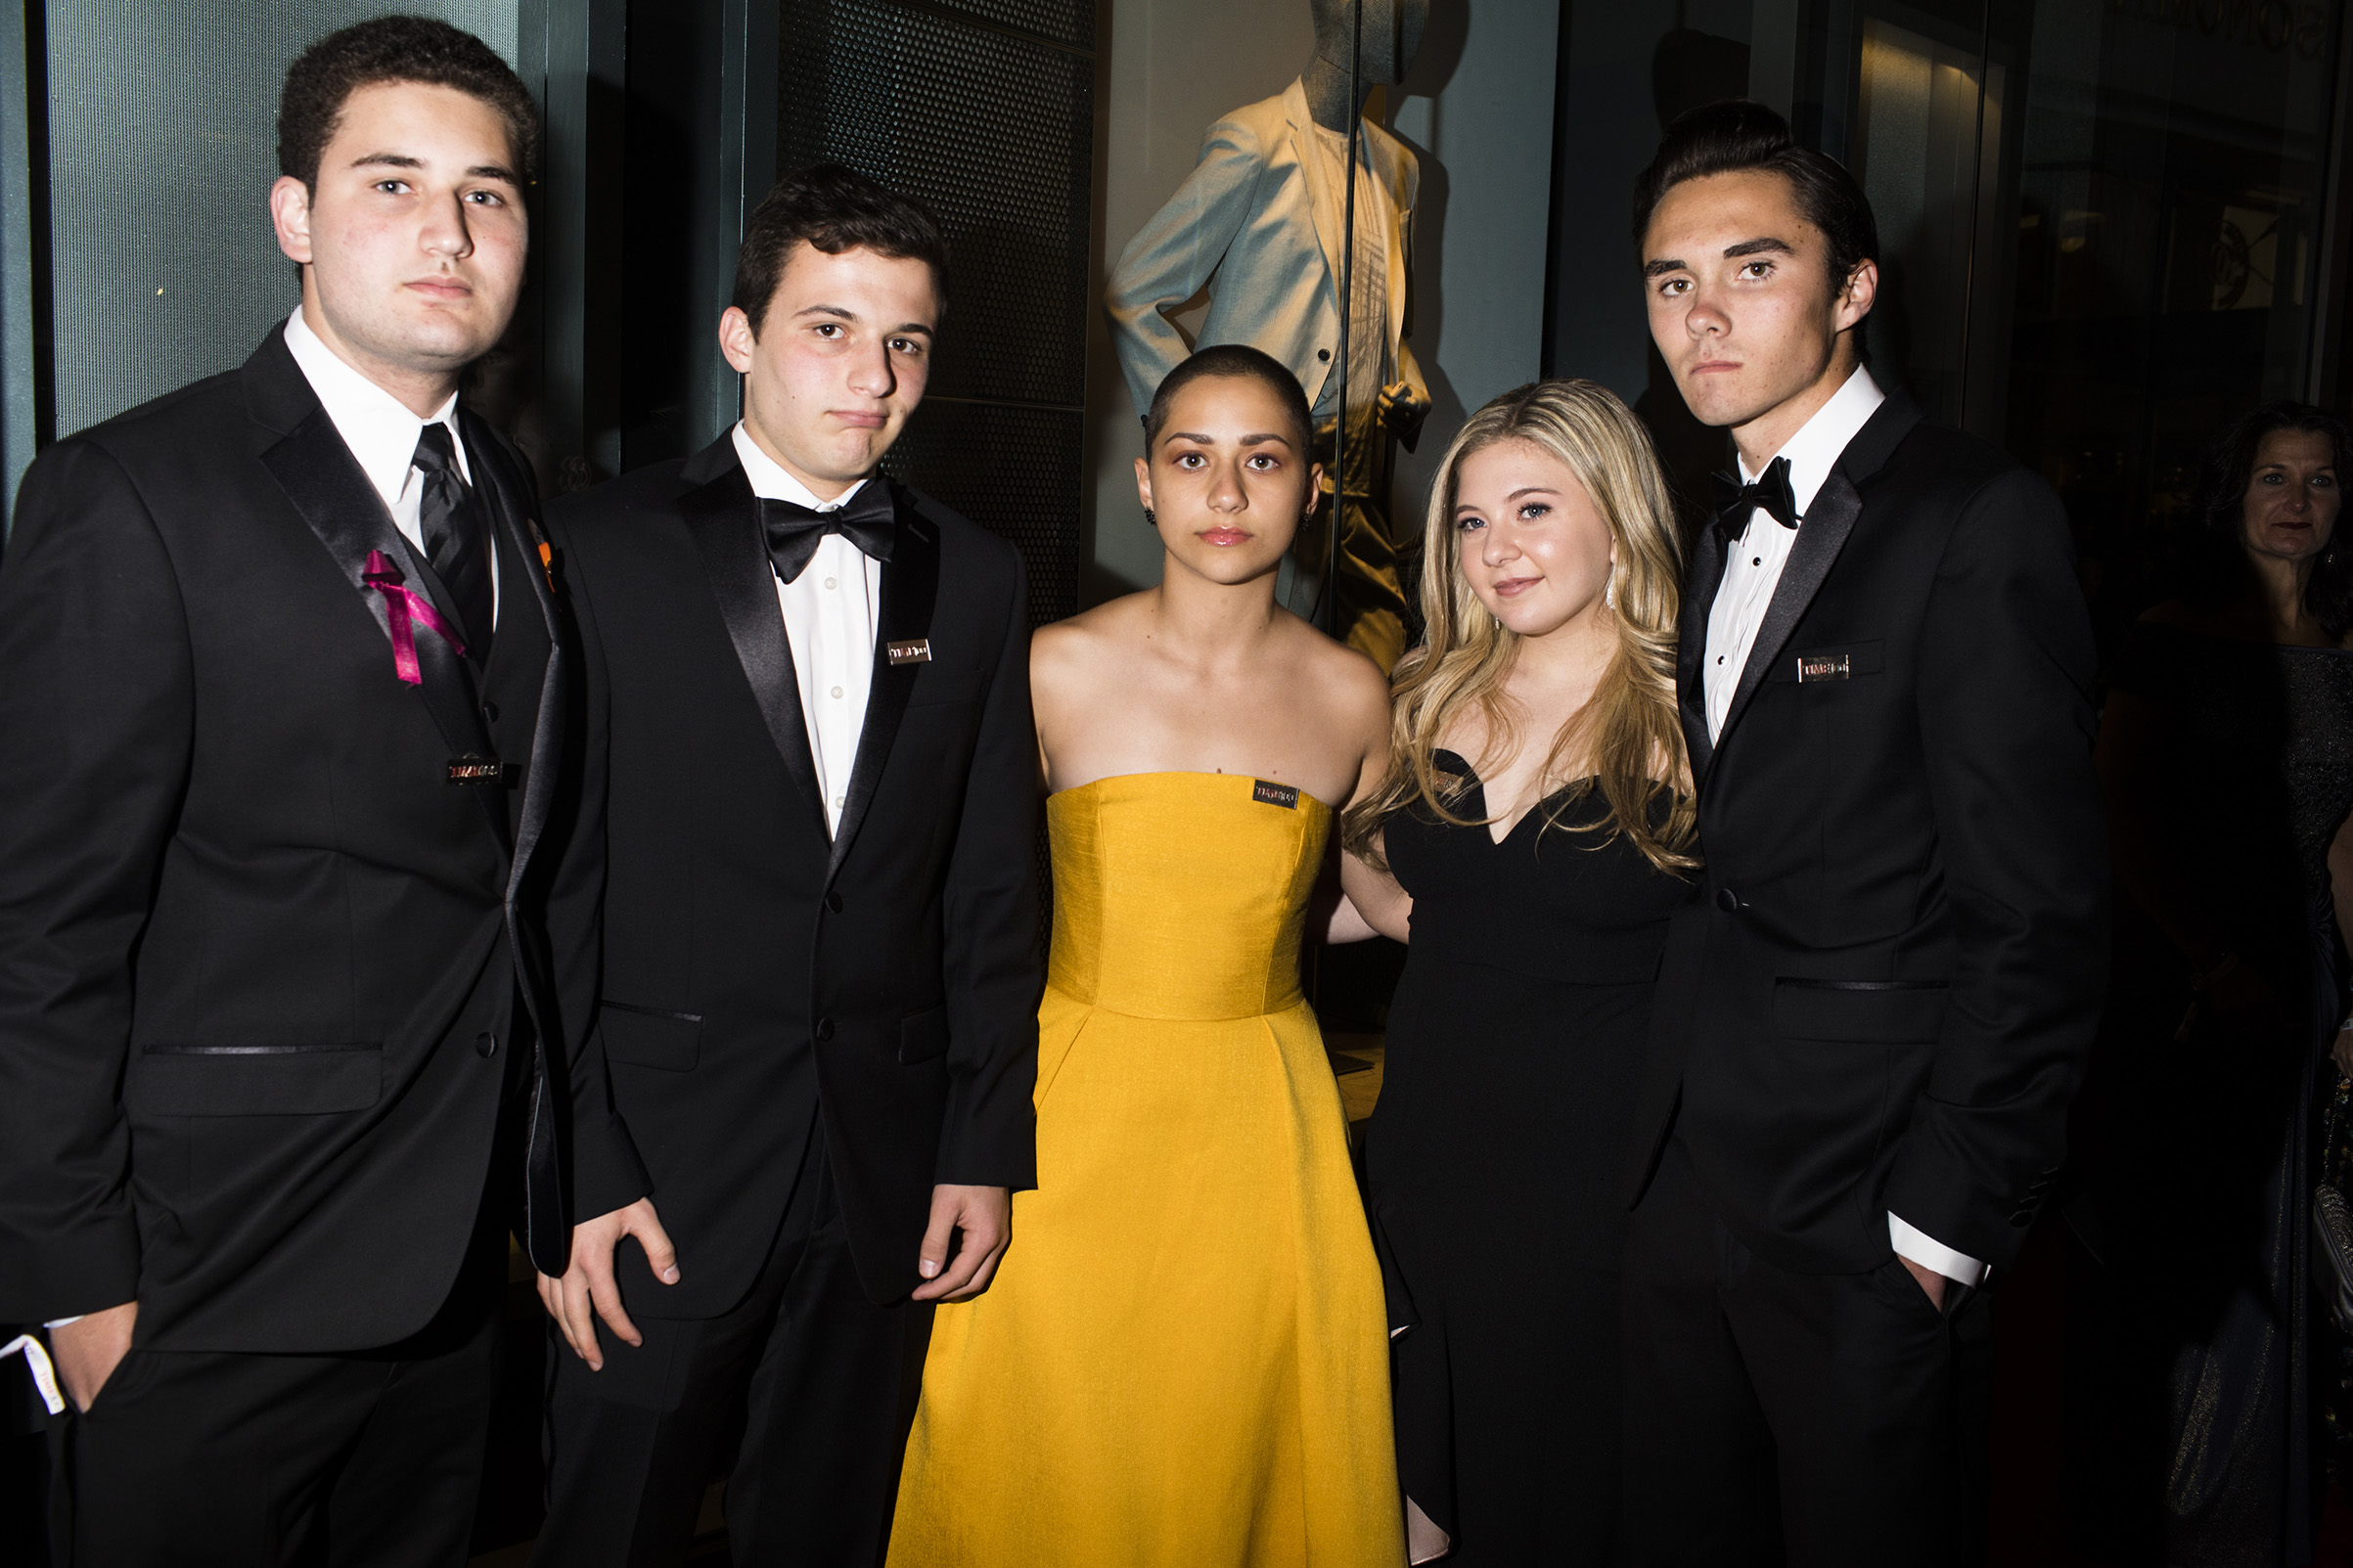 Parkland Activists Alex Wind, Cameron Kasky, Emma Gonzalez, Jaclyn Corin, and David Hogg at the Time 100 Gala at Jazz at Lincoln Center on April 24, 2018 in New York City. (Landon Nordeman for TIME)